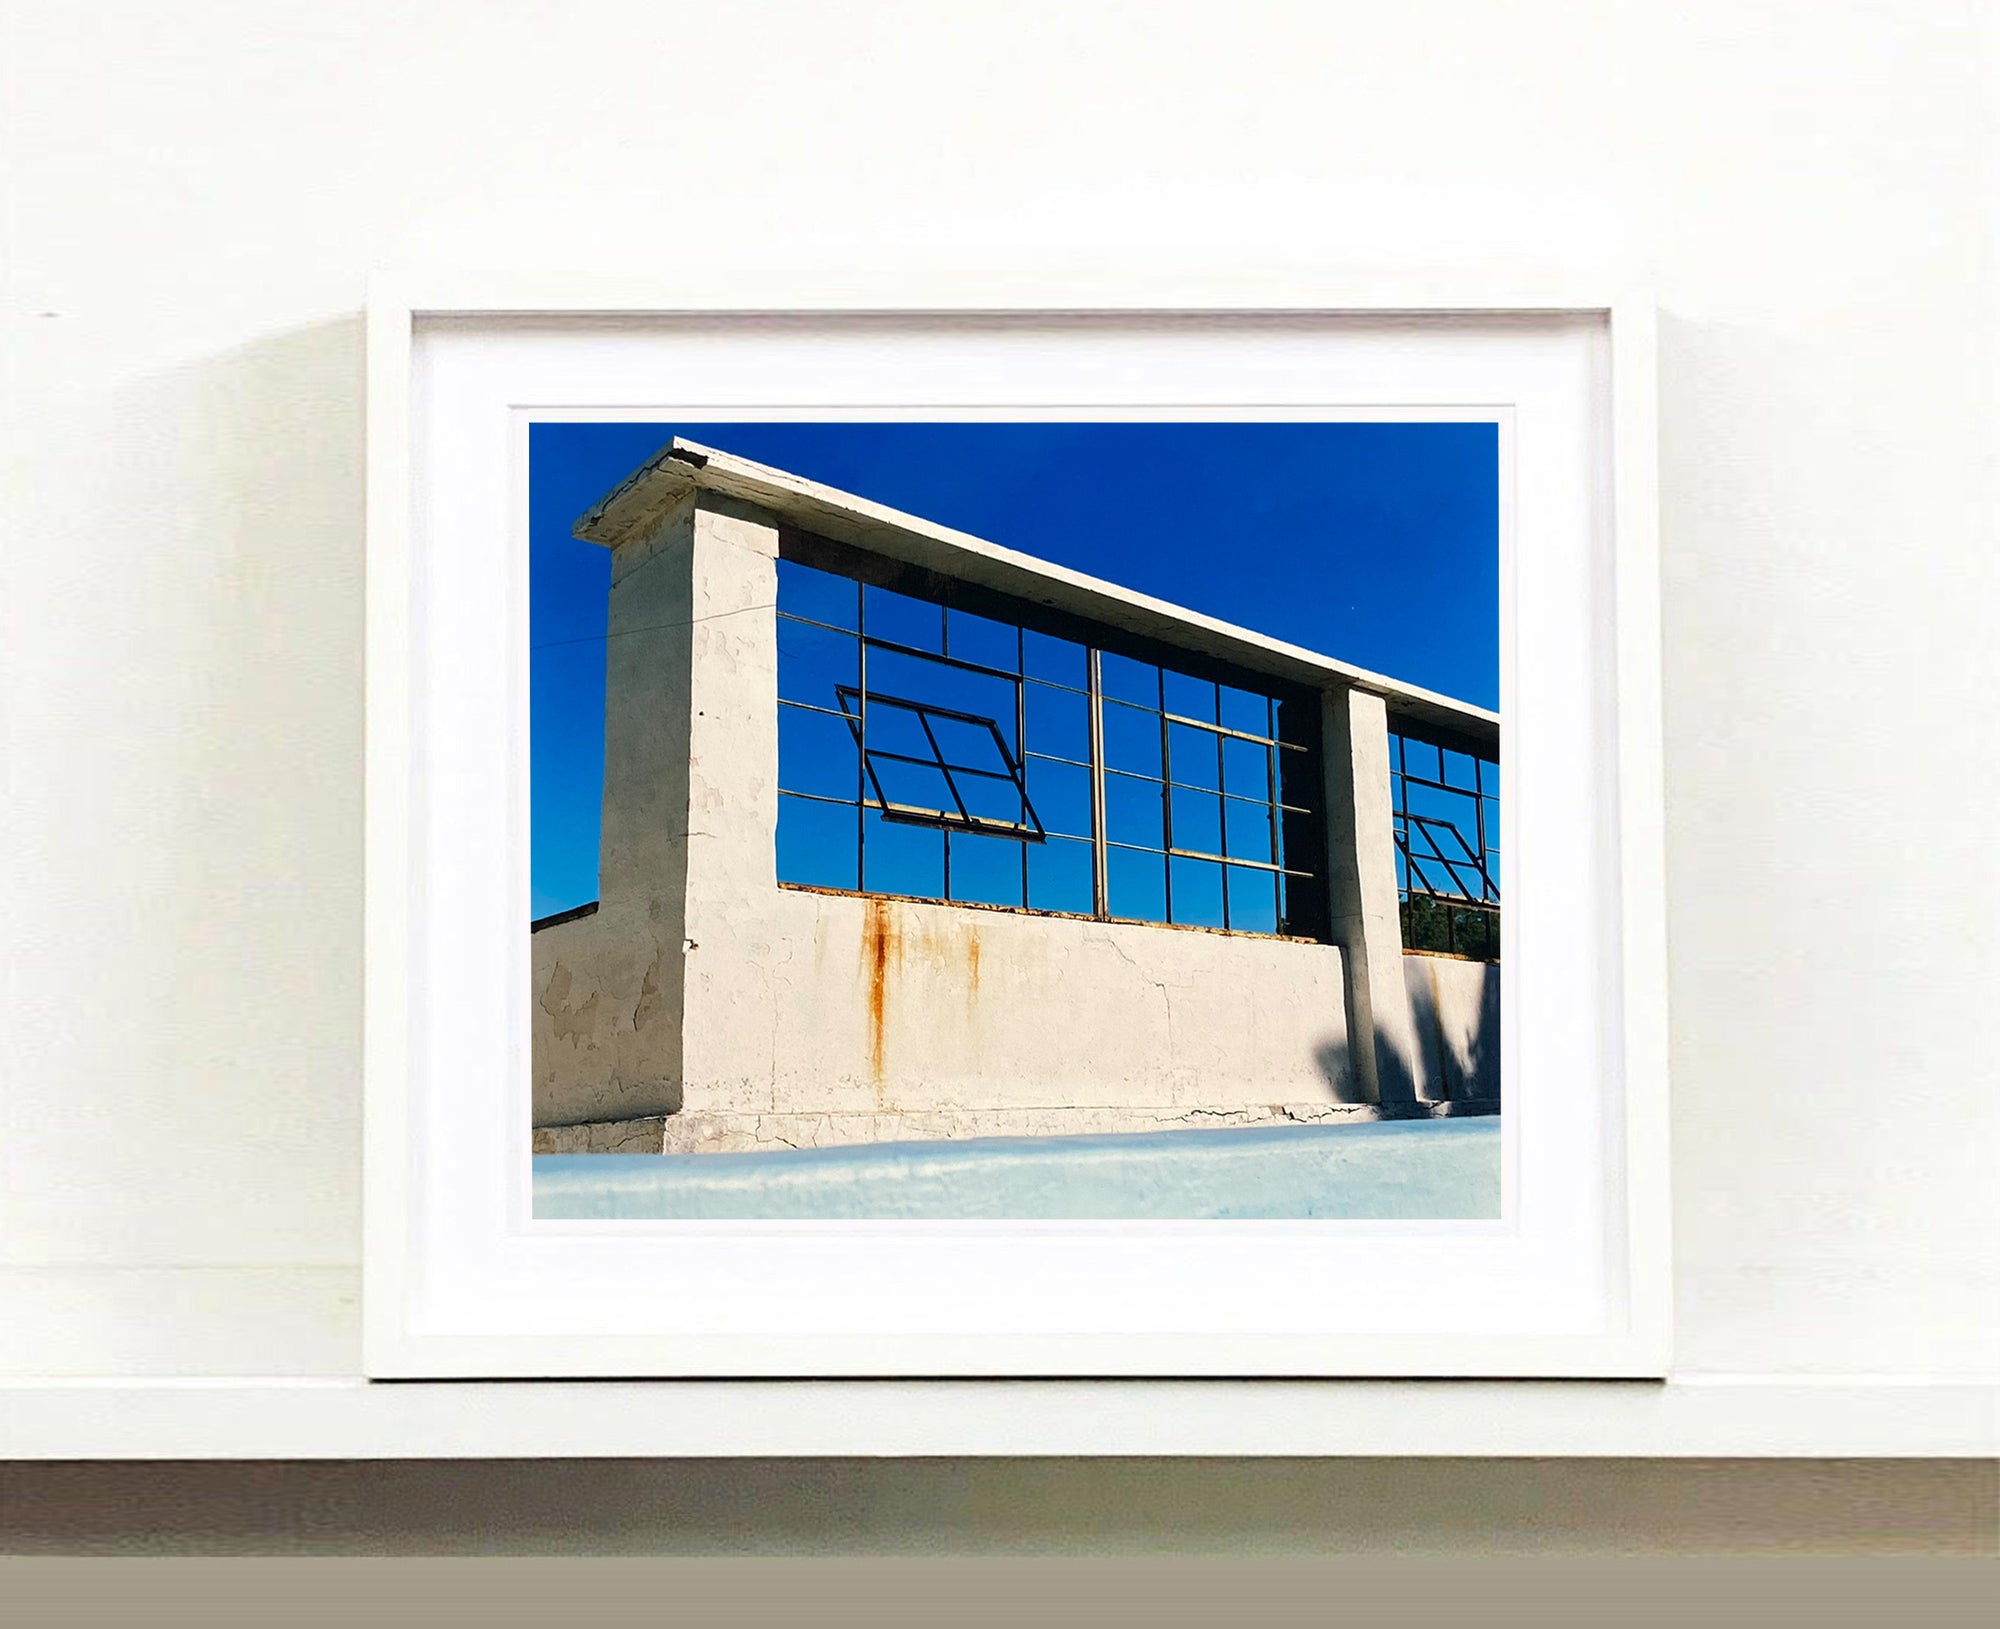 Window of the World, Zzyzx Resort Pool, photographed in Soda Dry Lake, California shows window pains and a distressed wall, against a bright blue background of sky. This artwork is part of Richard's 'Dream in Colour' series. 